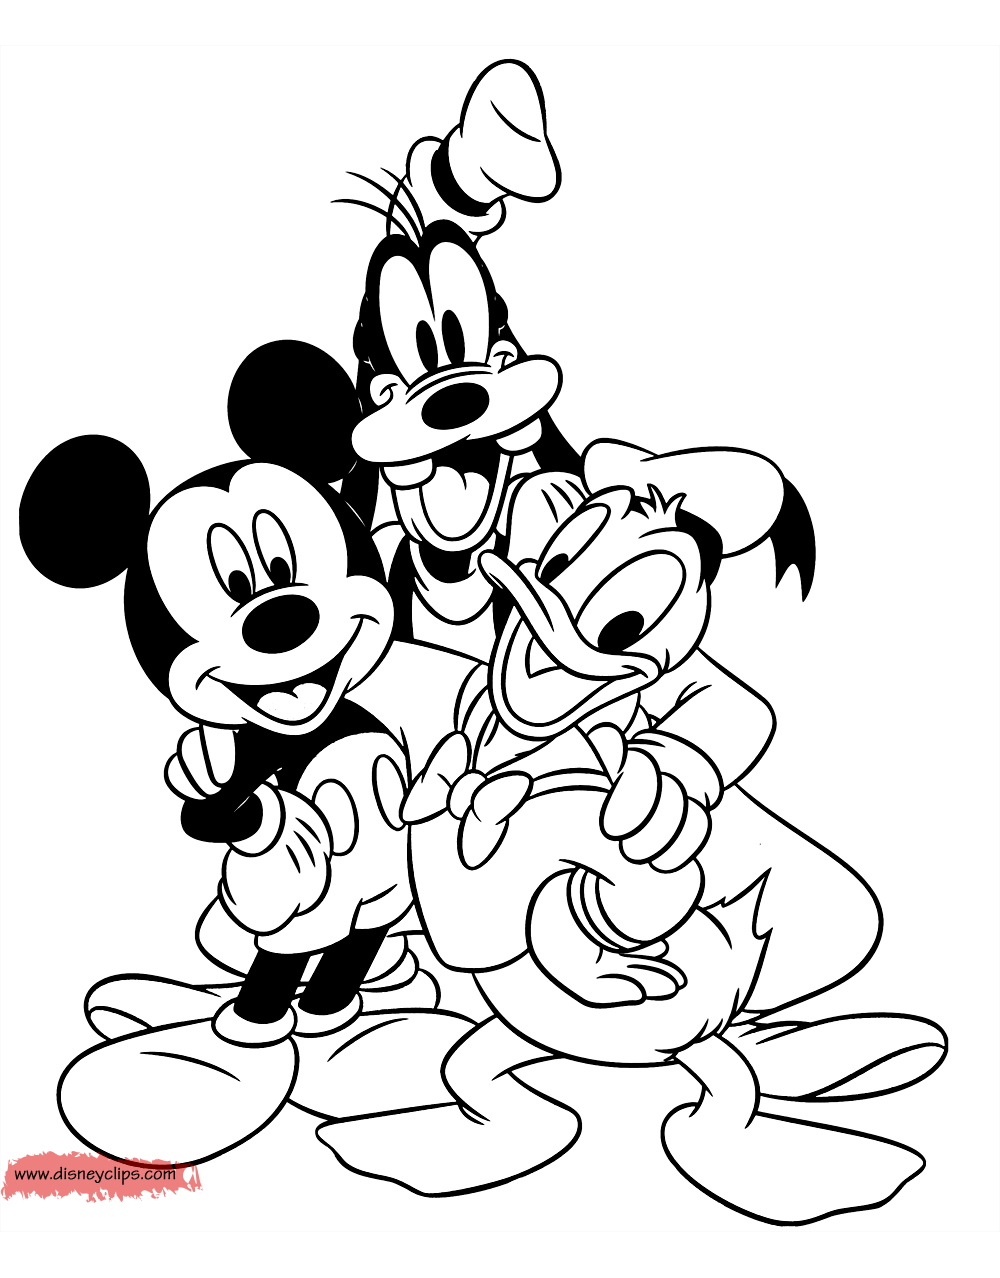 mickey and friends coloring pages mickey mouse friends printable coloring pages disney mickey friends and pages coloring 